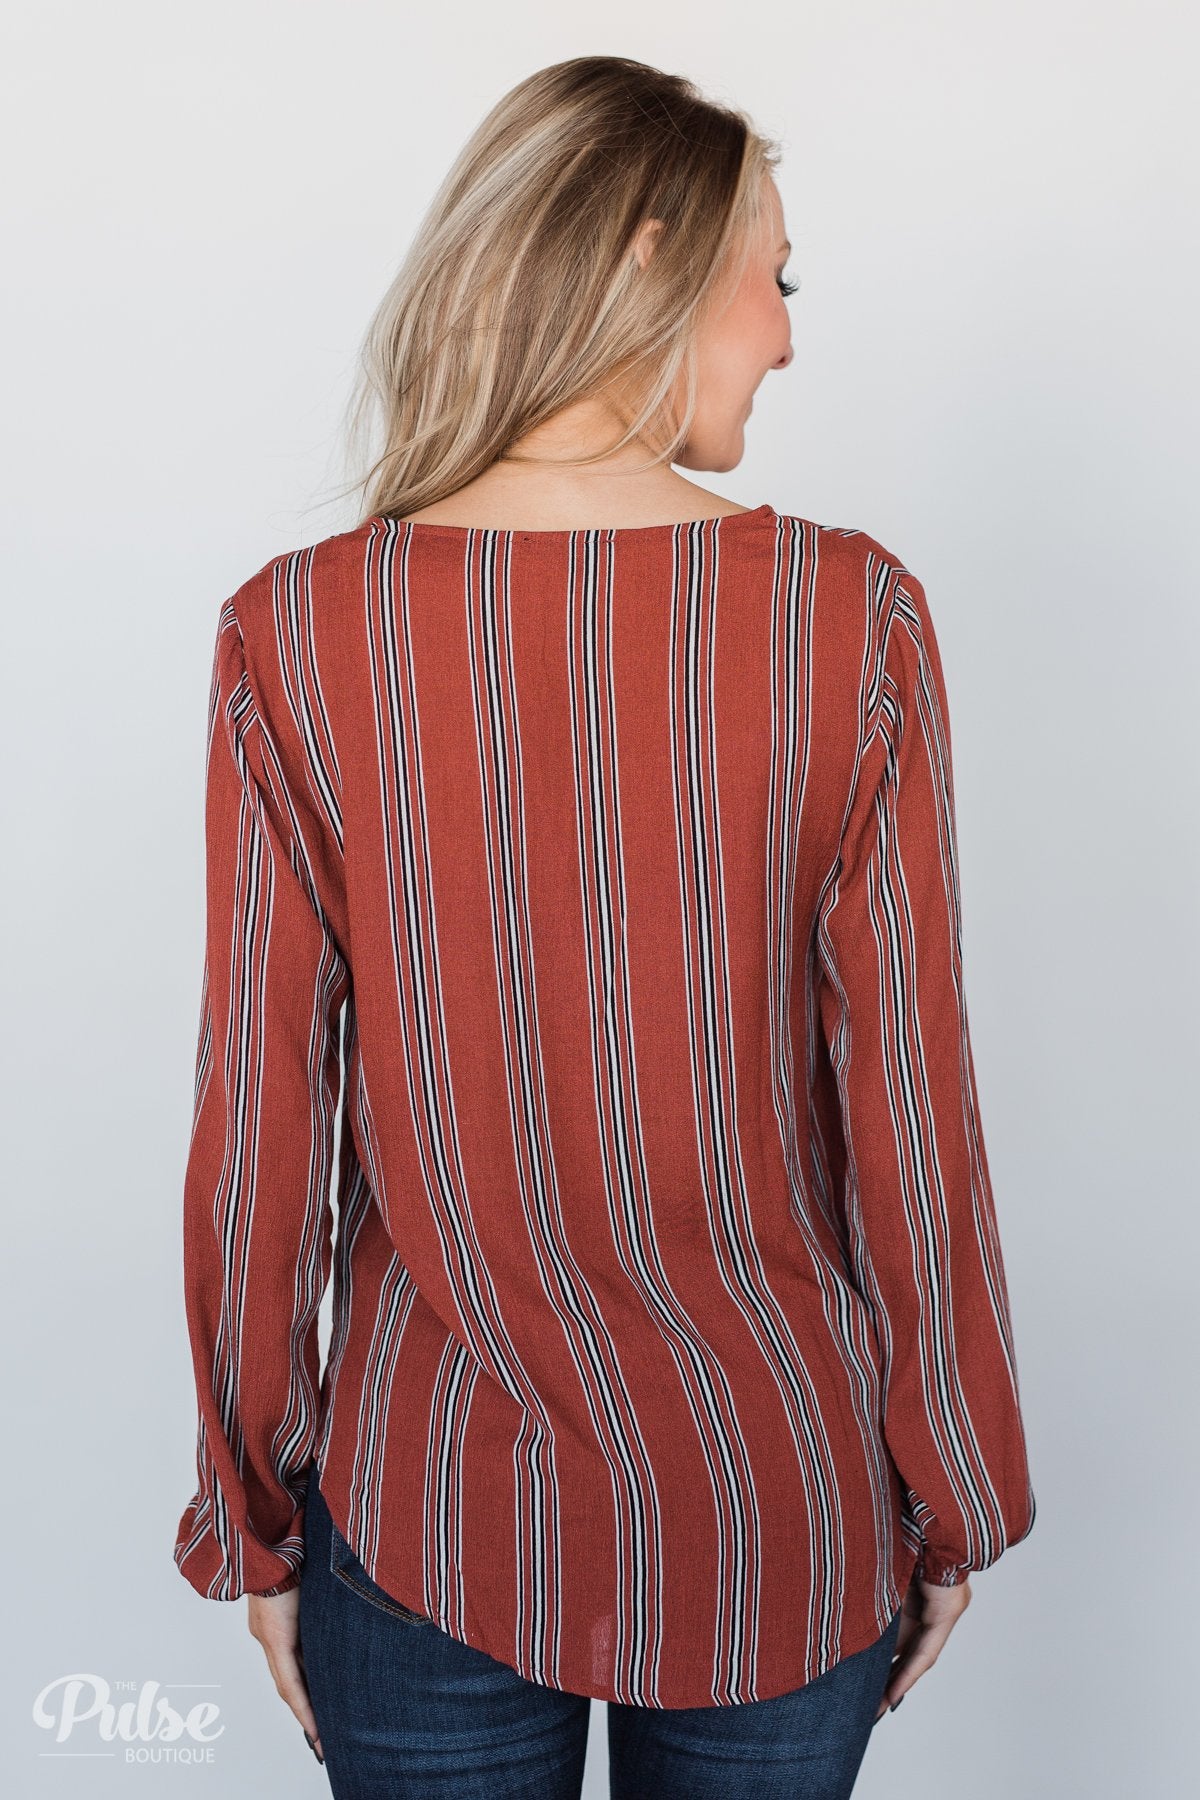 Take Your Time Striped Tie Top- Clay